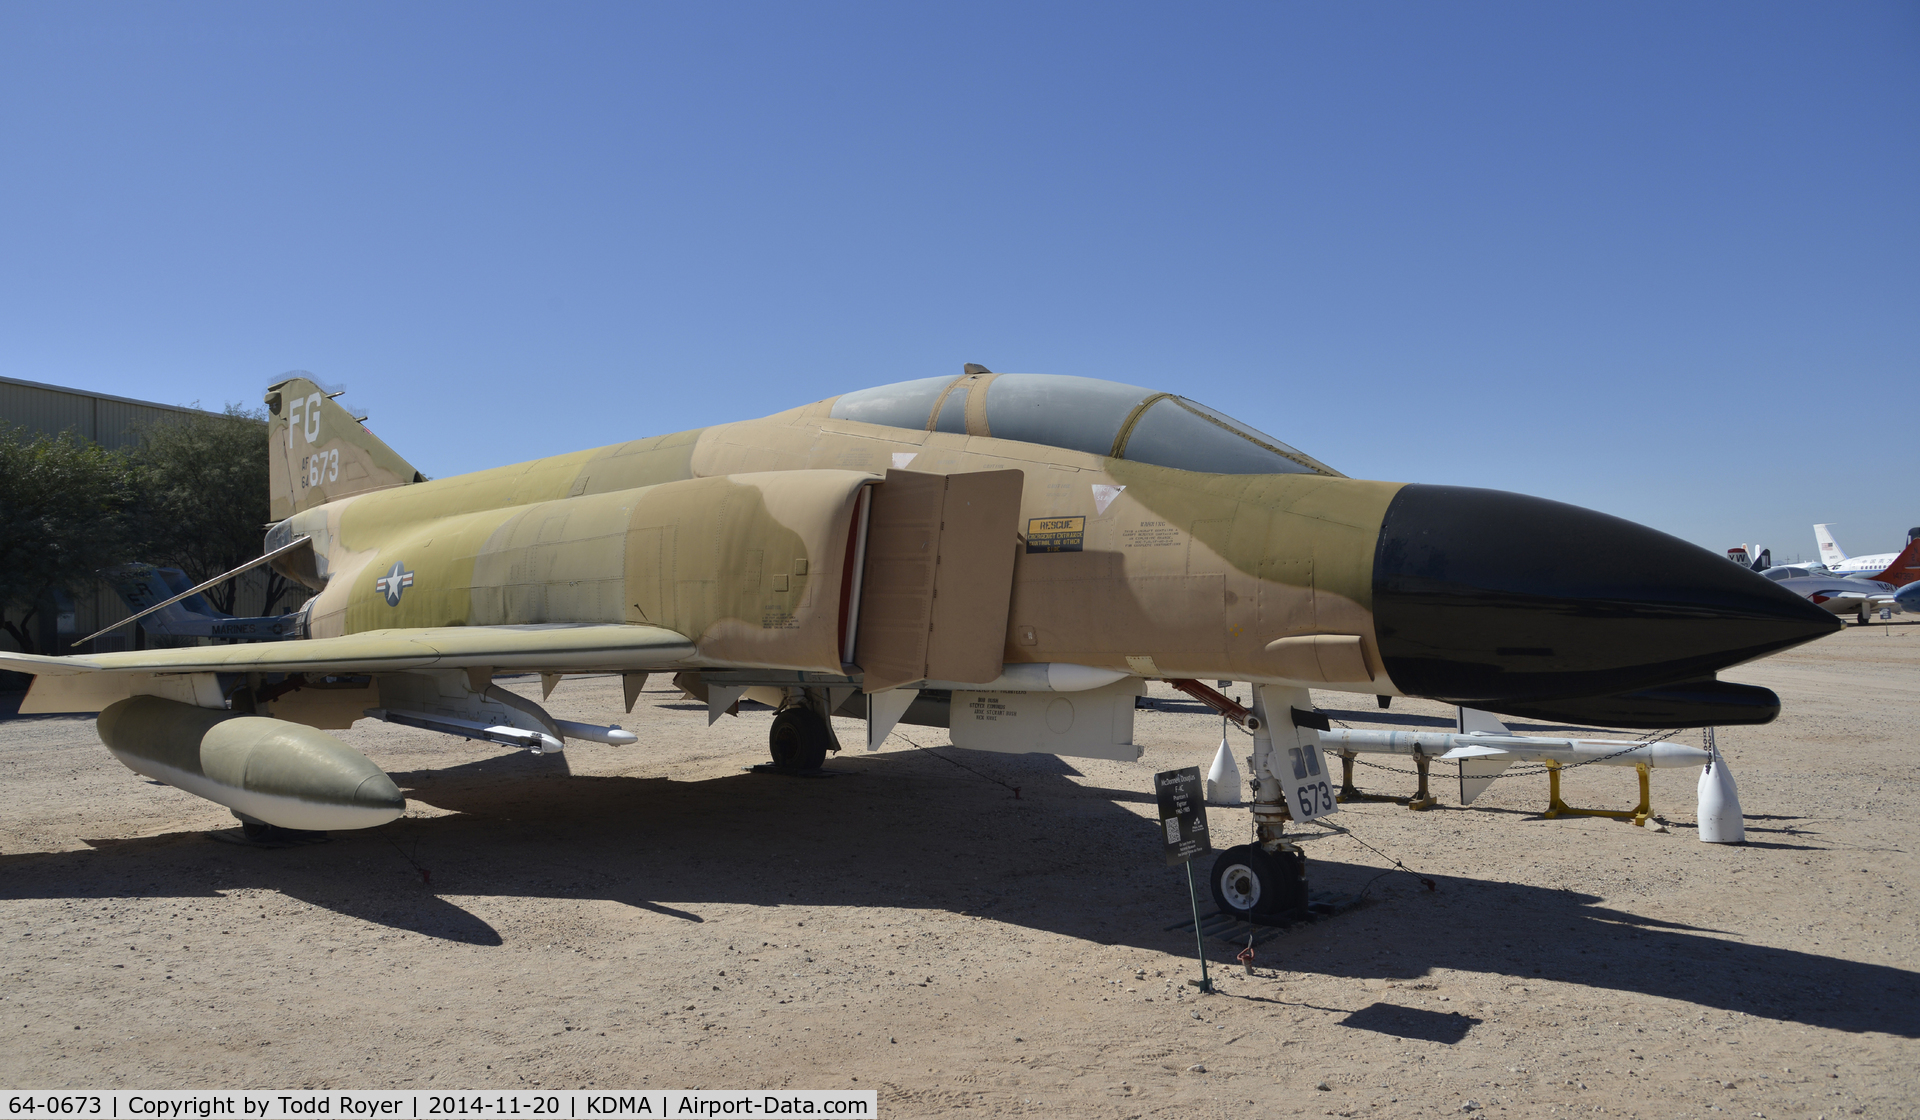 64-0673, 1964 McDonnell F-4C-22-MC Phantom II C/N 898, On display at the Pima Air and Space Museum